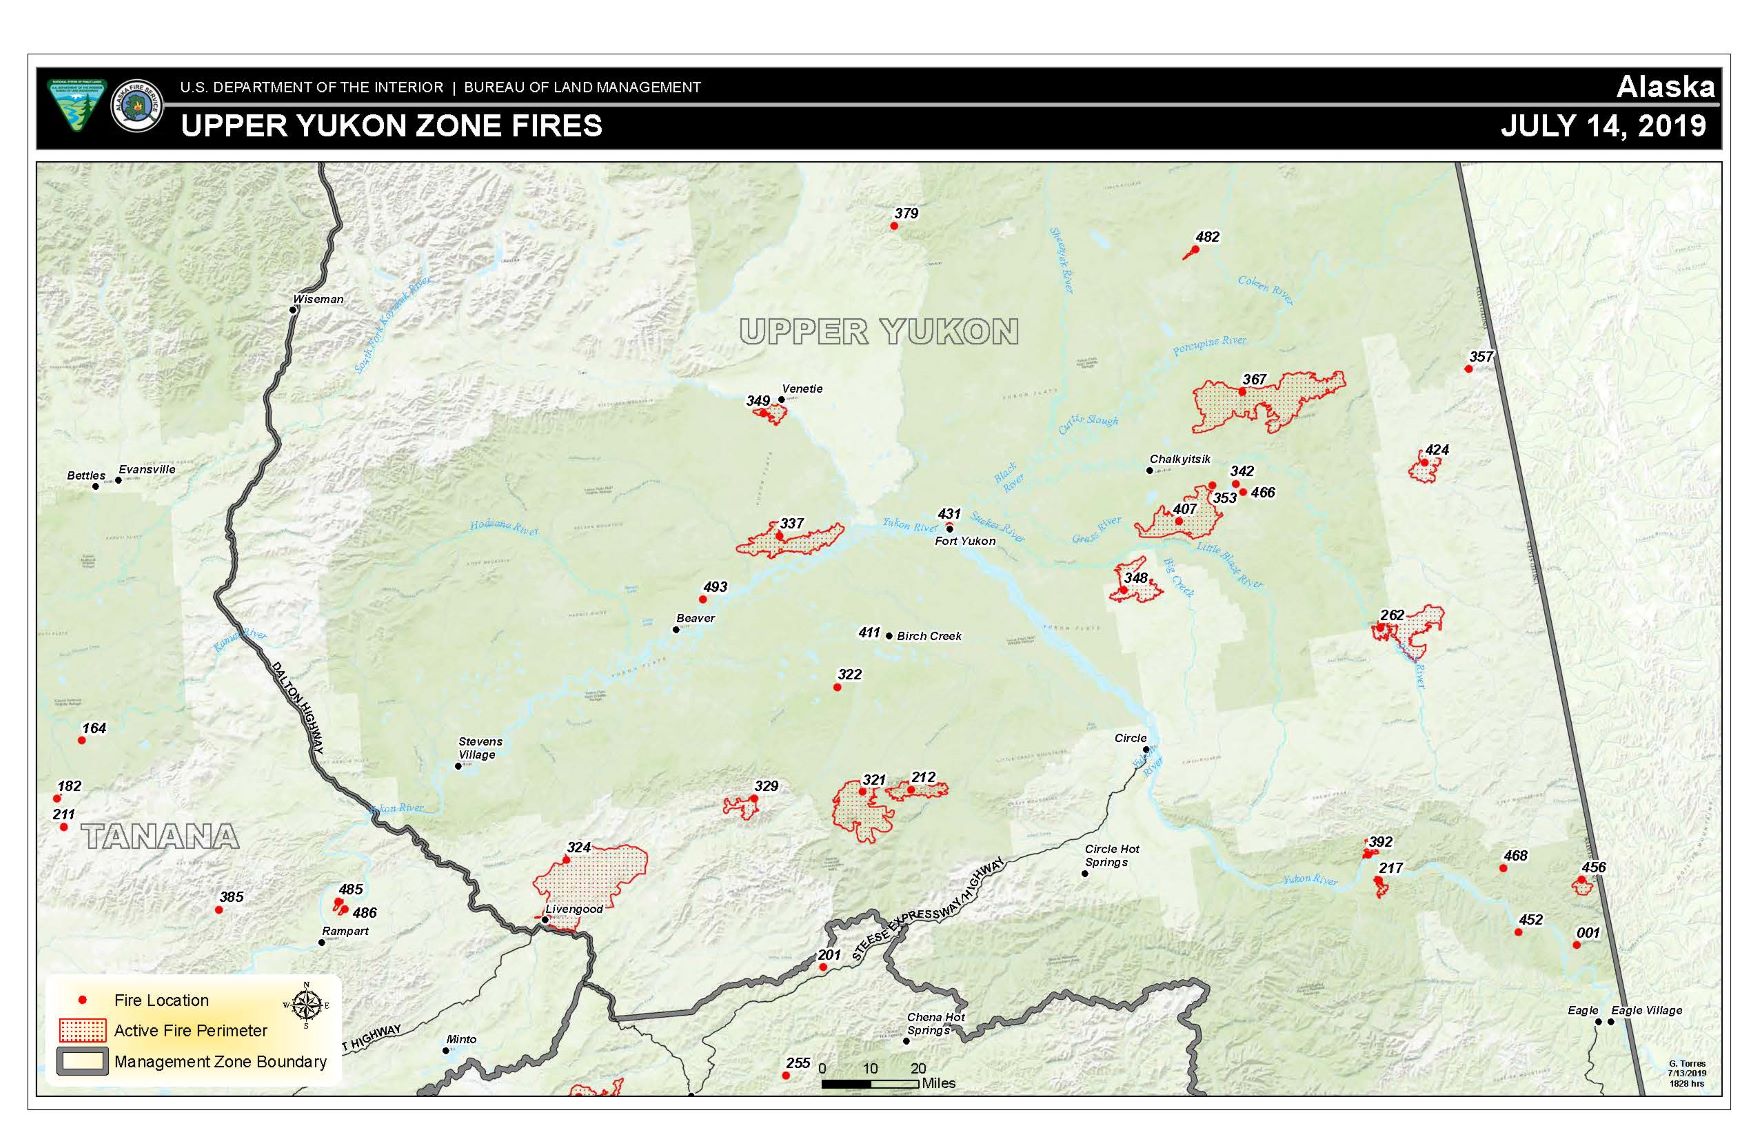 Map of fires in the Upper Yukon Zone on July 14, 2019.